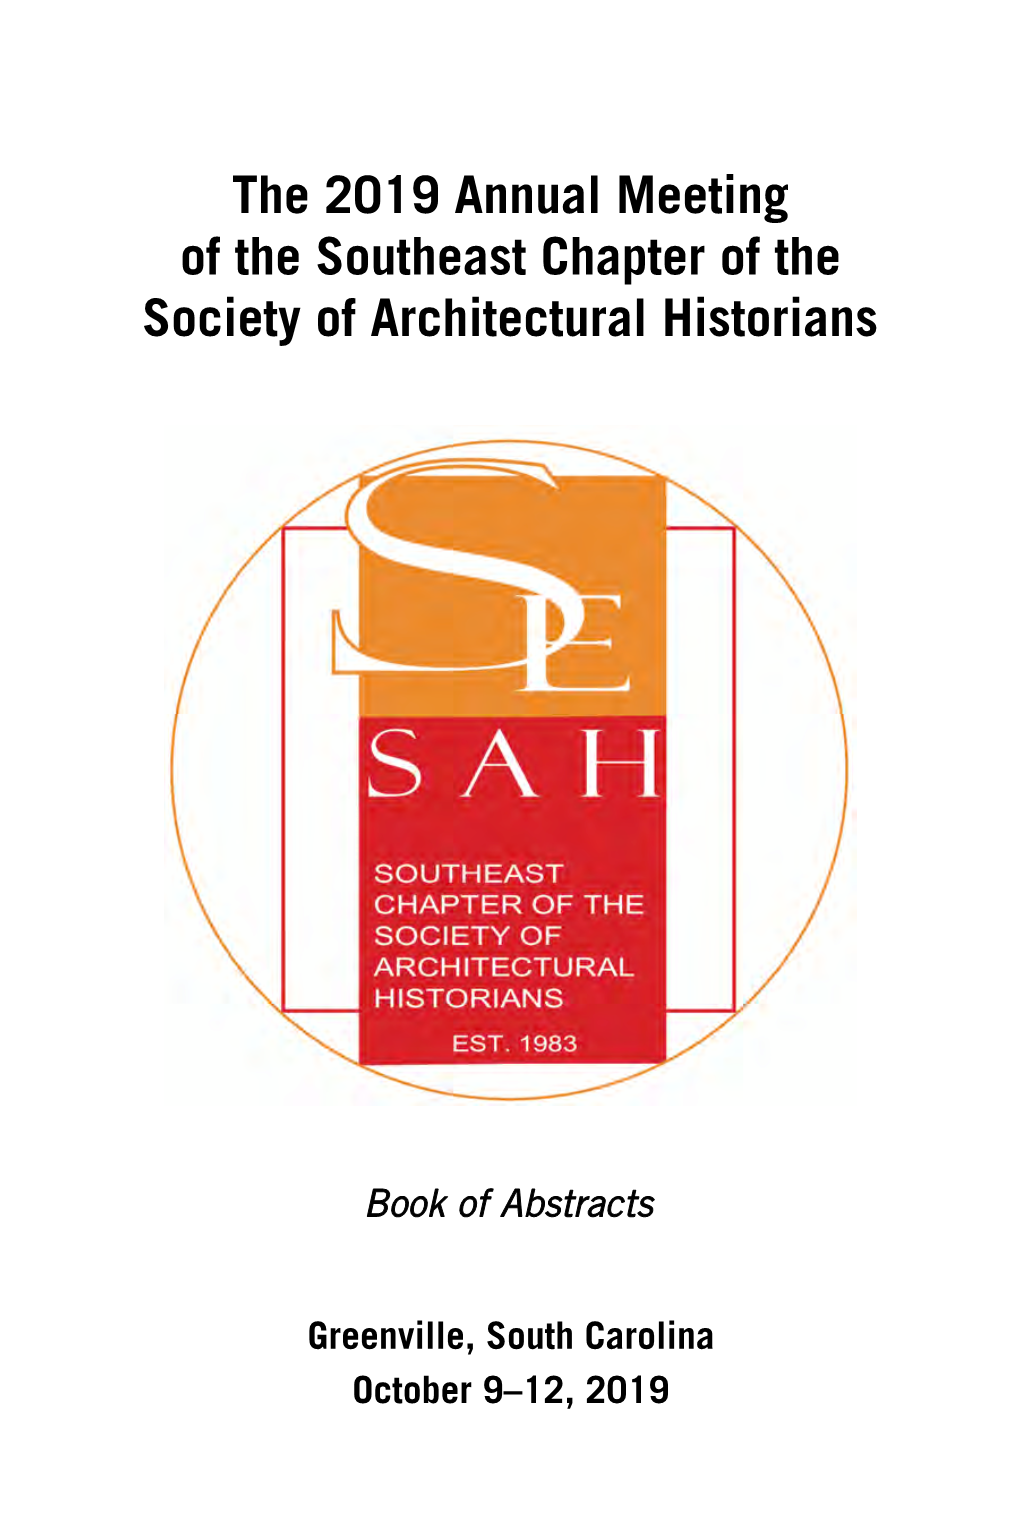 The 2019 Annual Meeting of the Southeast Chapter of the Society of Architectural Historians